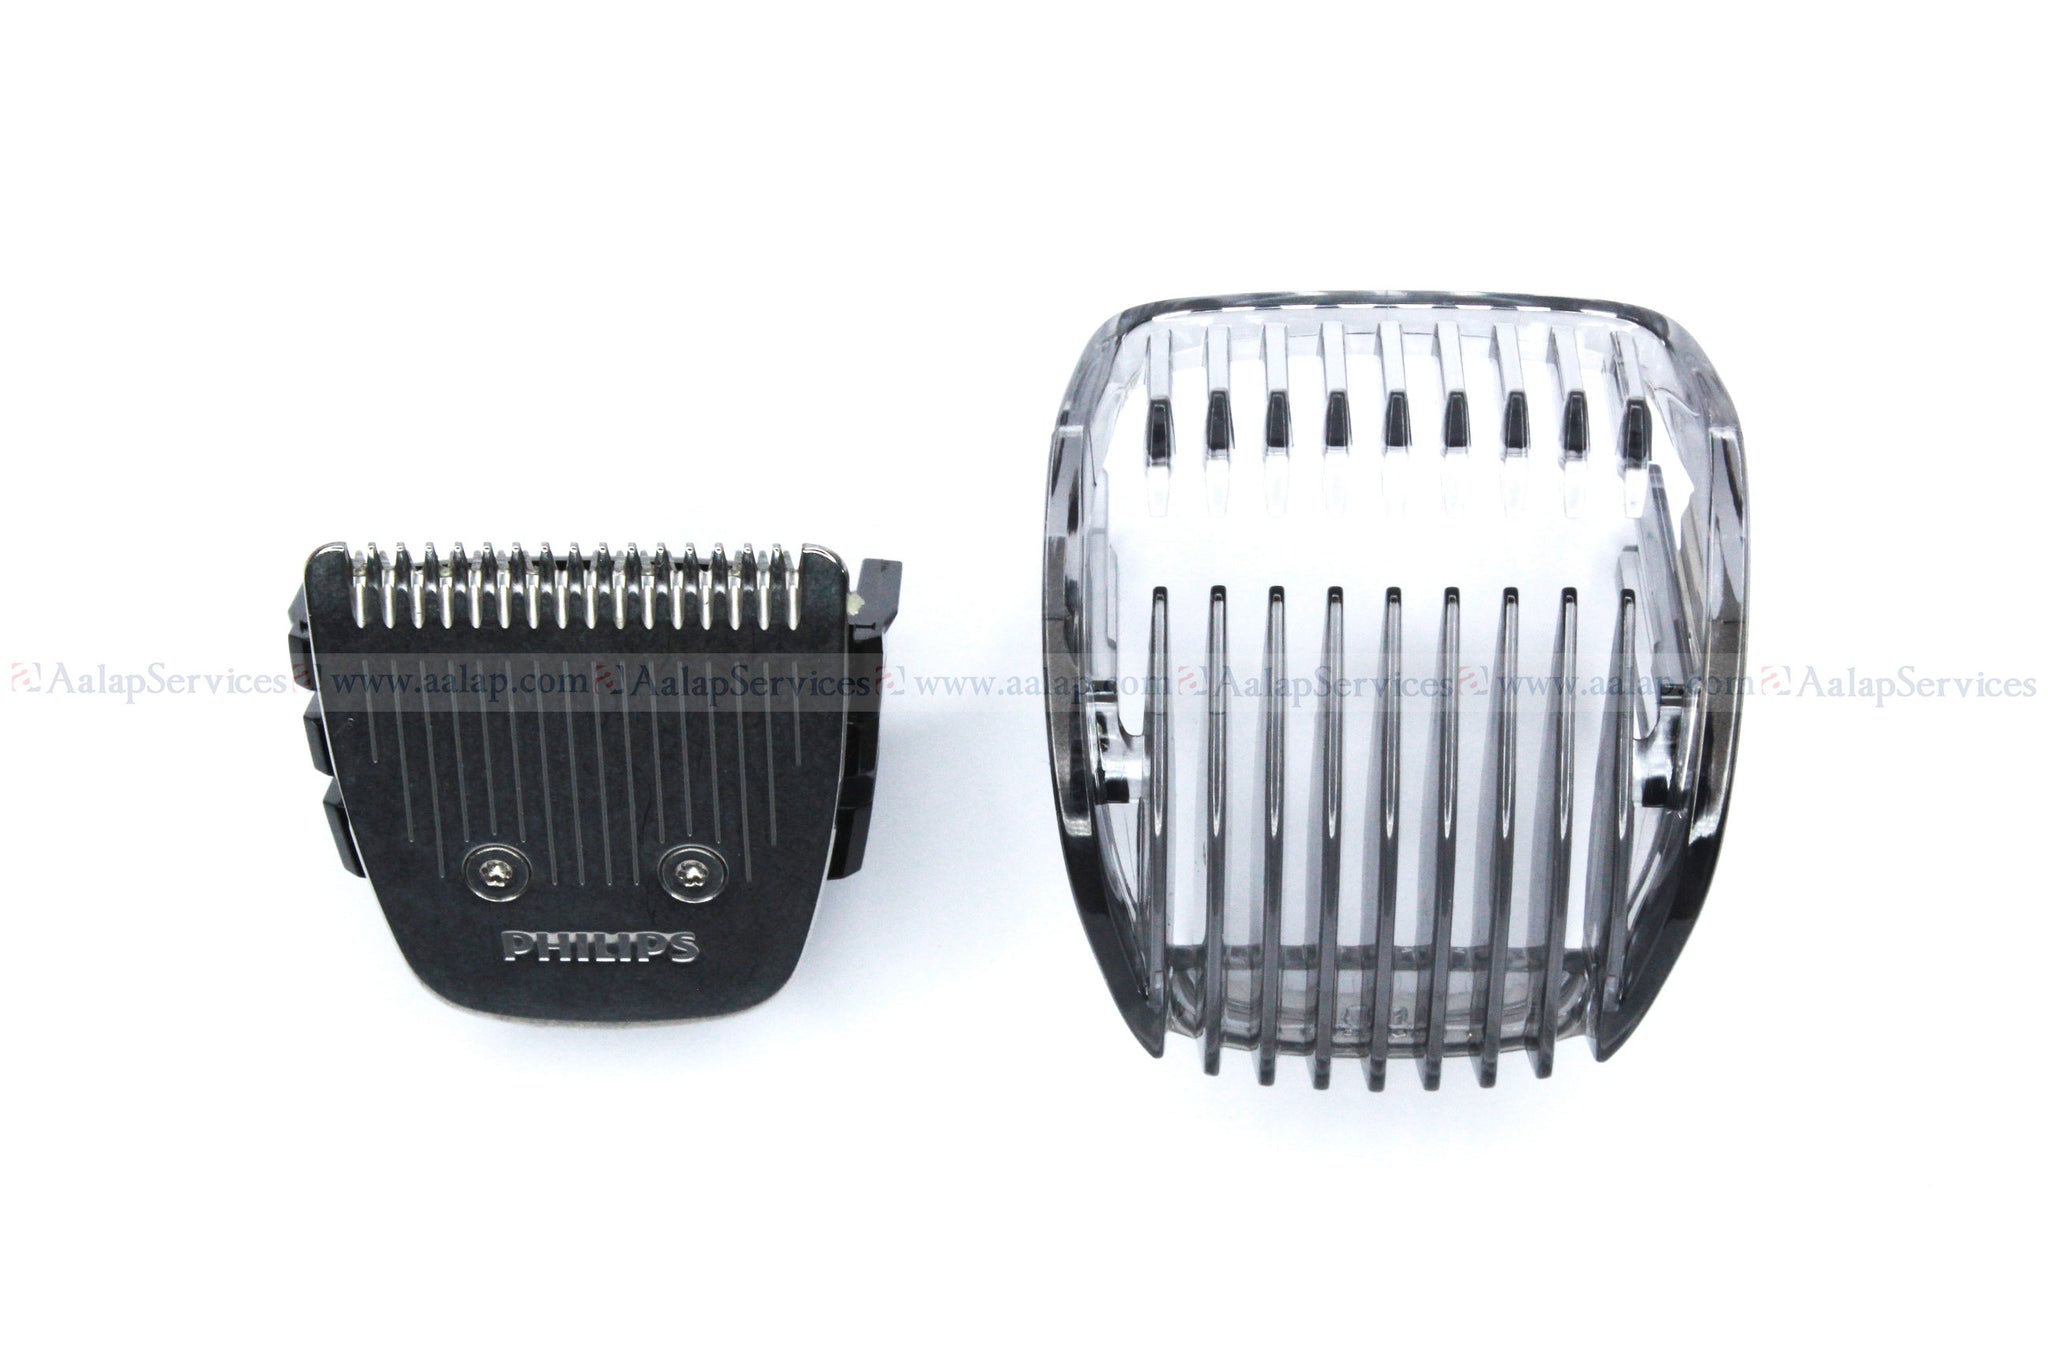 Attachment and Comb Set for BT7201 BT7205 BT720 – Aalap Inc.